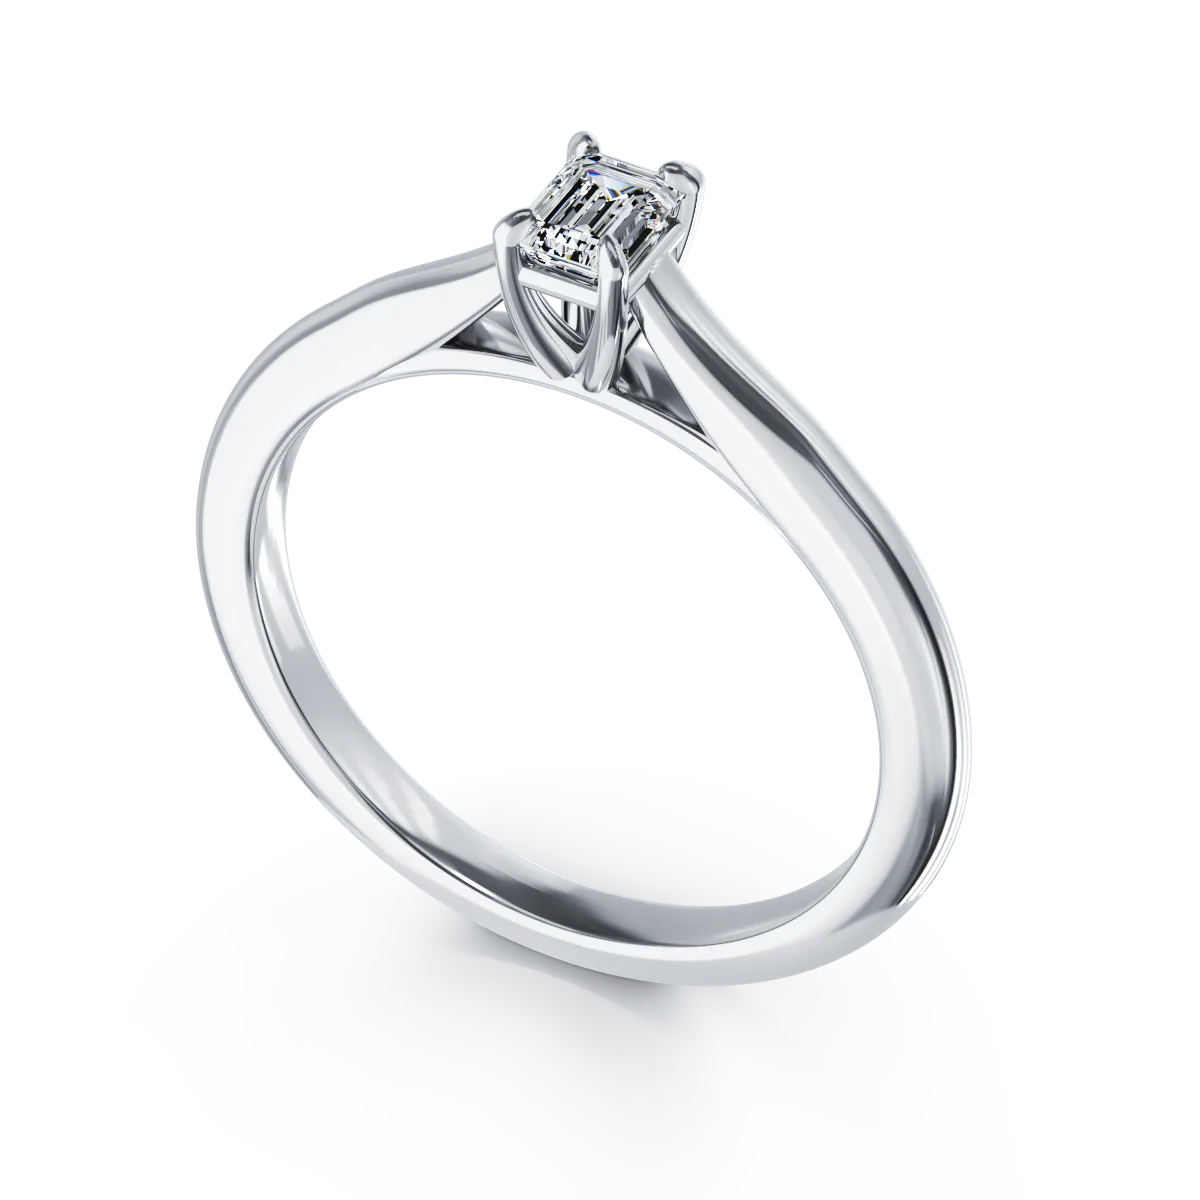 Platinum engagement ring with a 0.2ct solitaire diamond